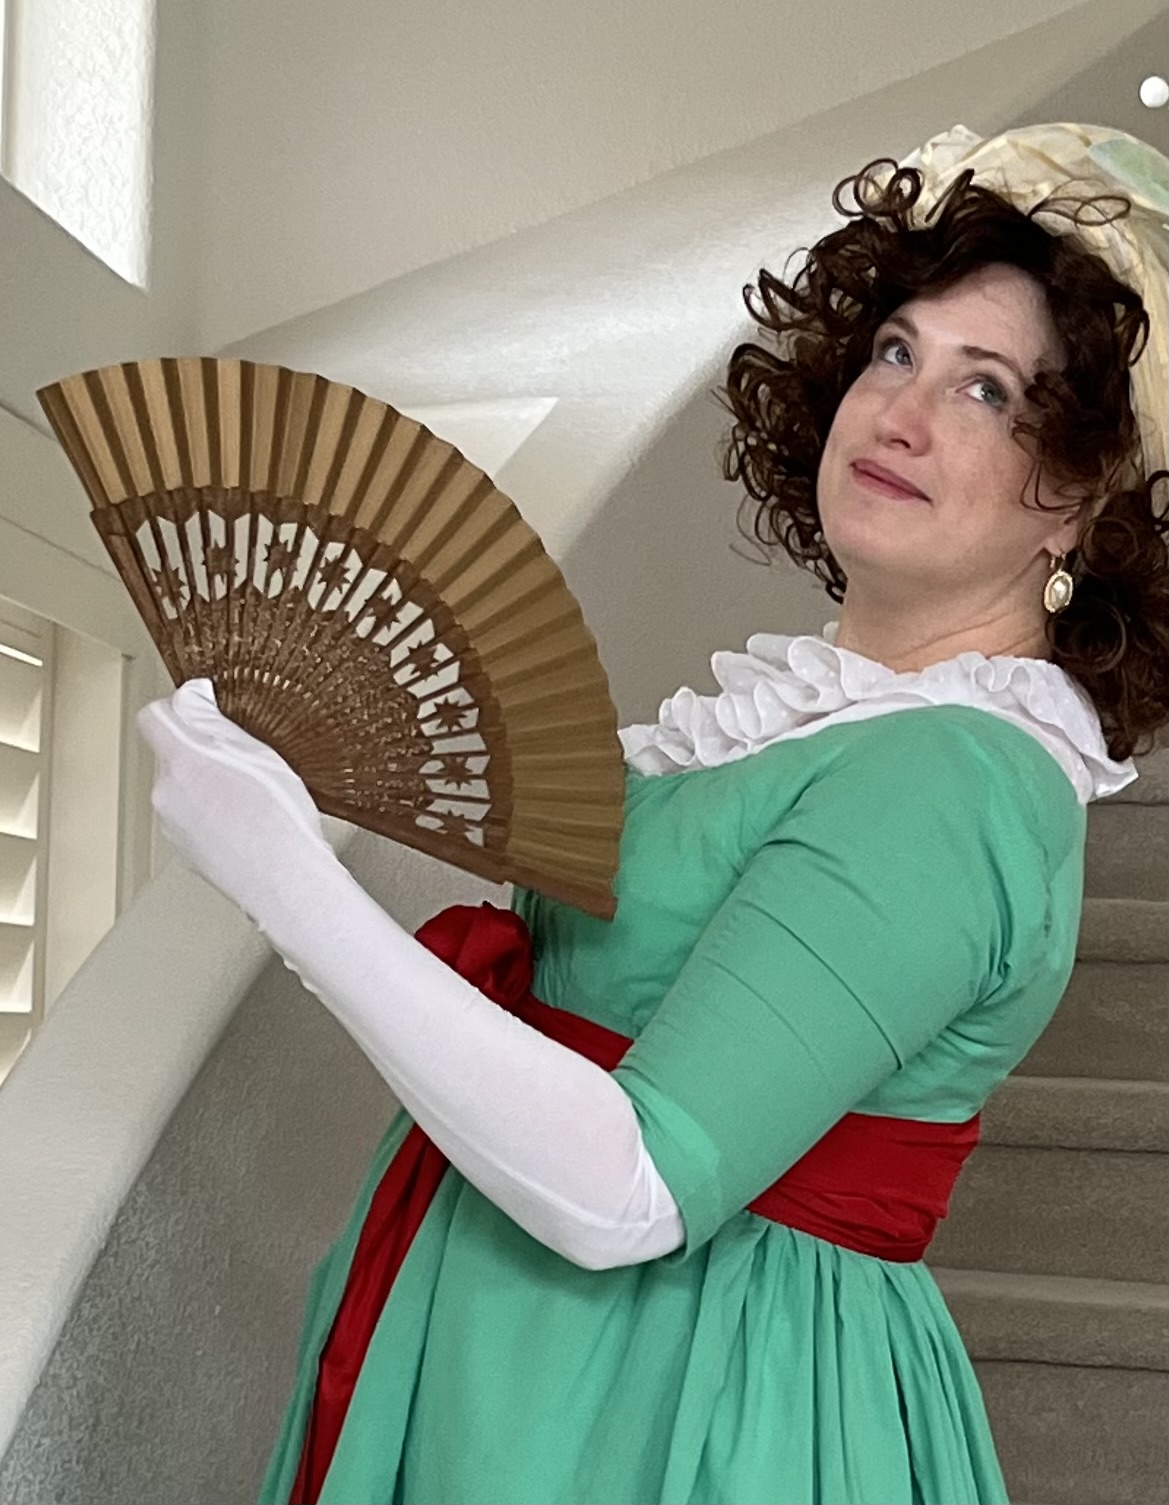 Tabubilgirl stands on a staircase wearing a green New Year gown with a white chemisette and a red sash and holding a gold fan.